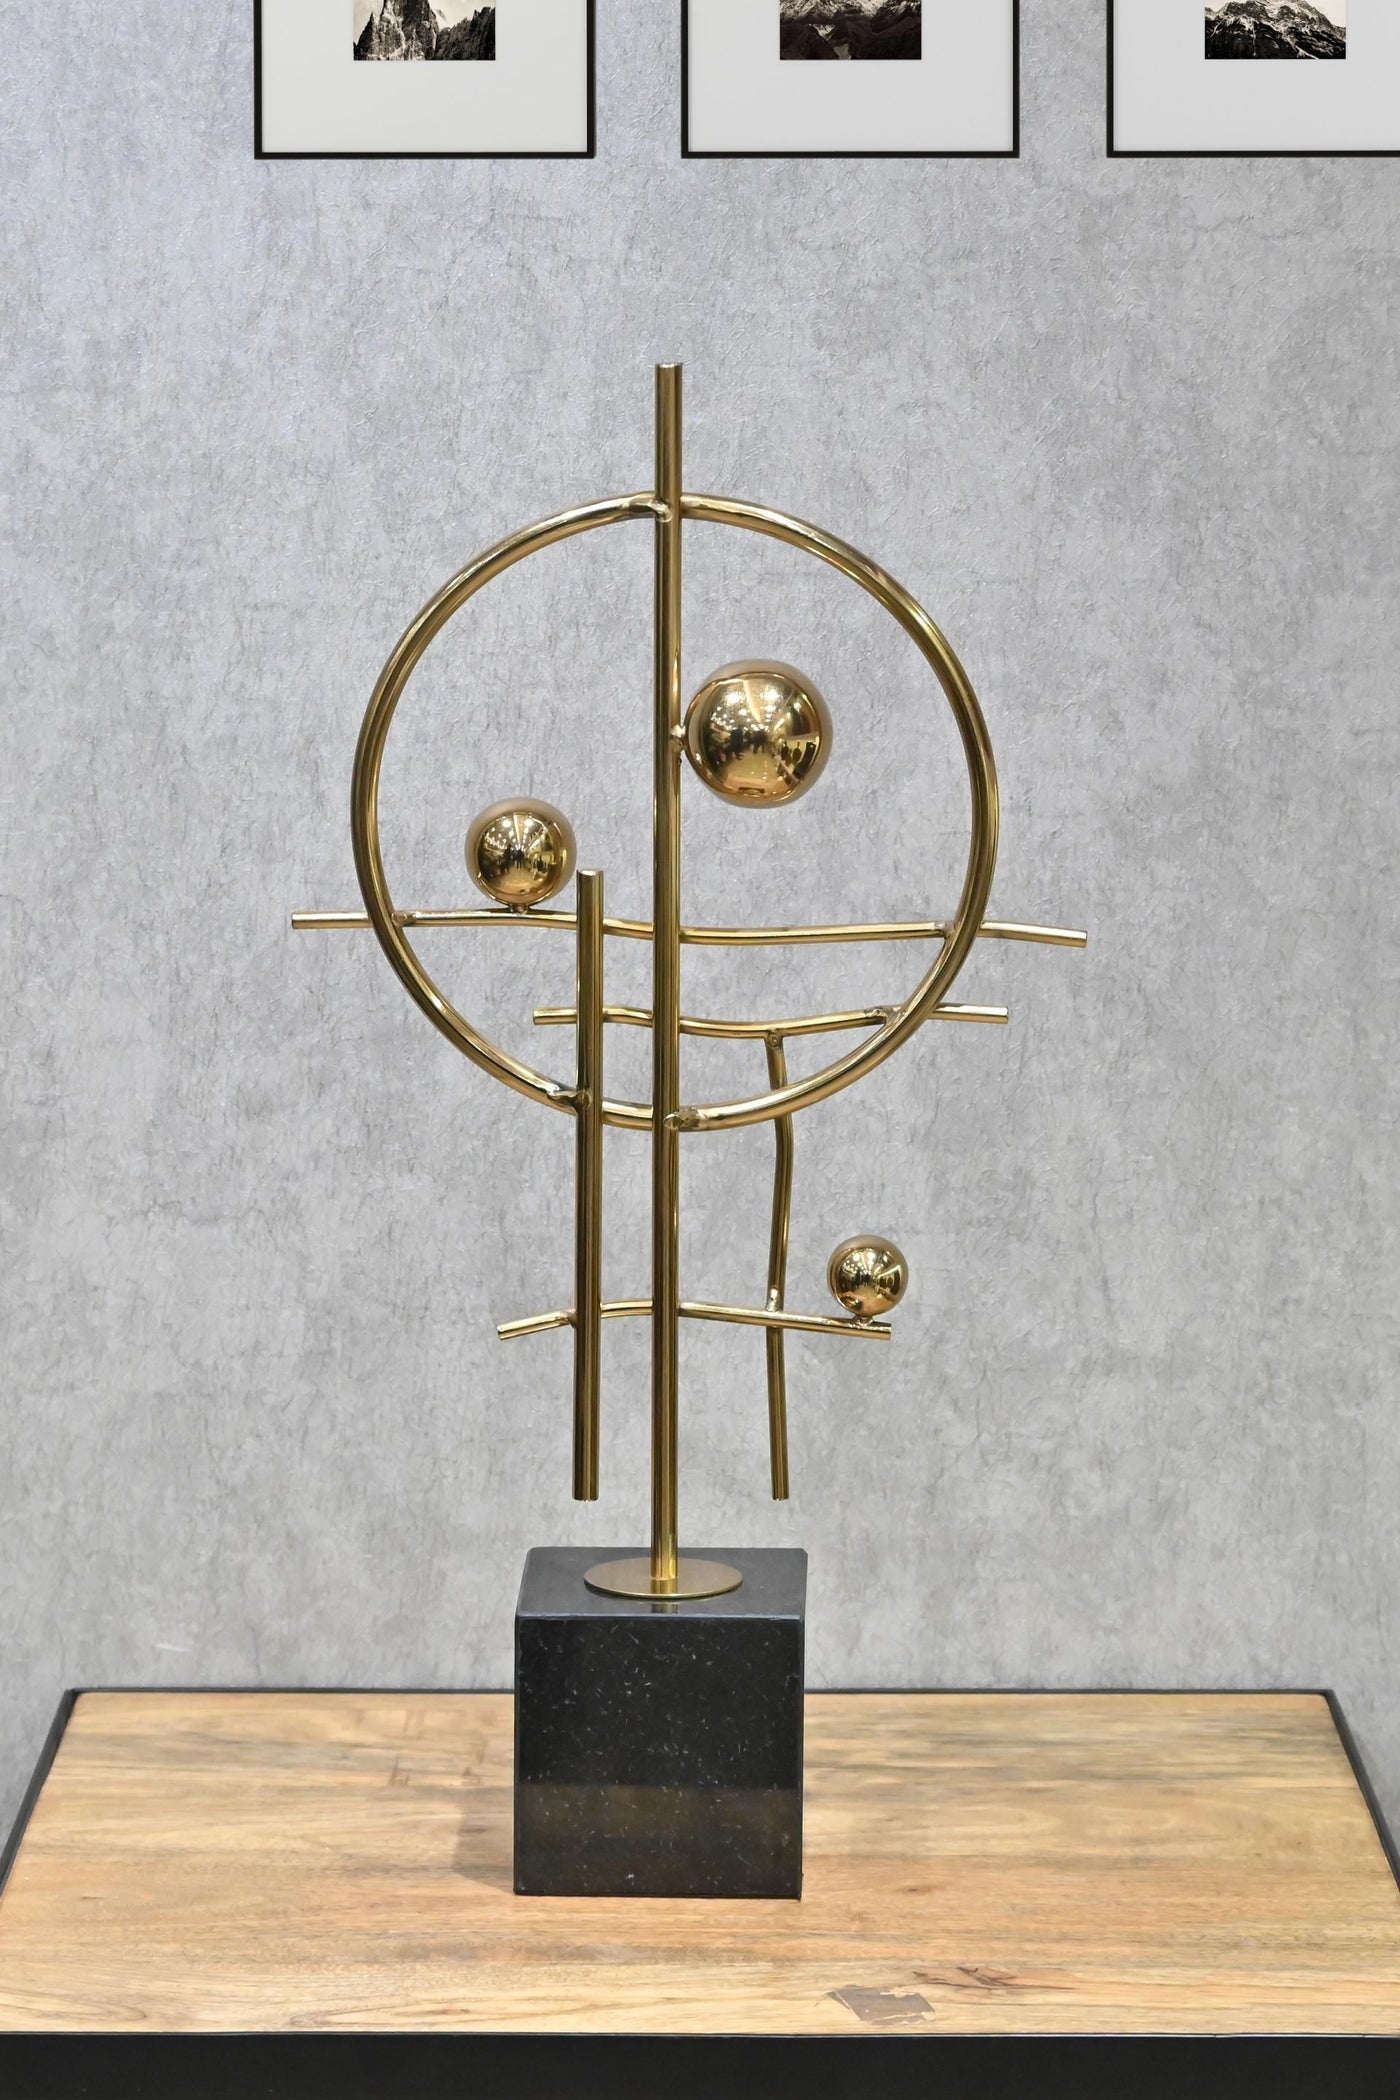 Golden Metal Contemporary Sculpture for your Home or Office Decor-Large